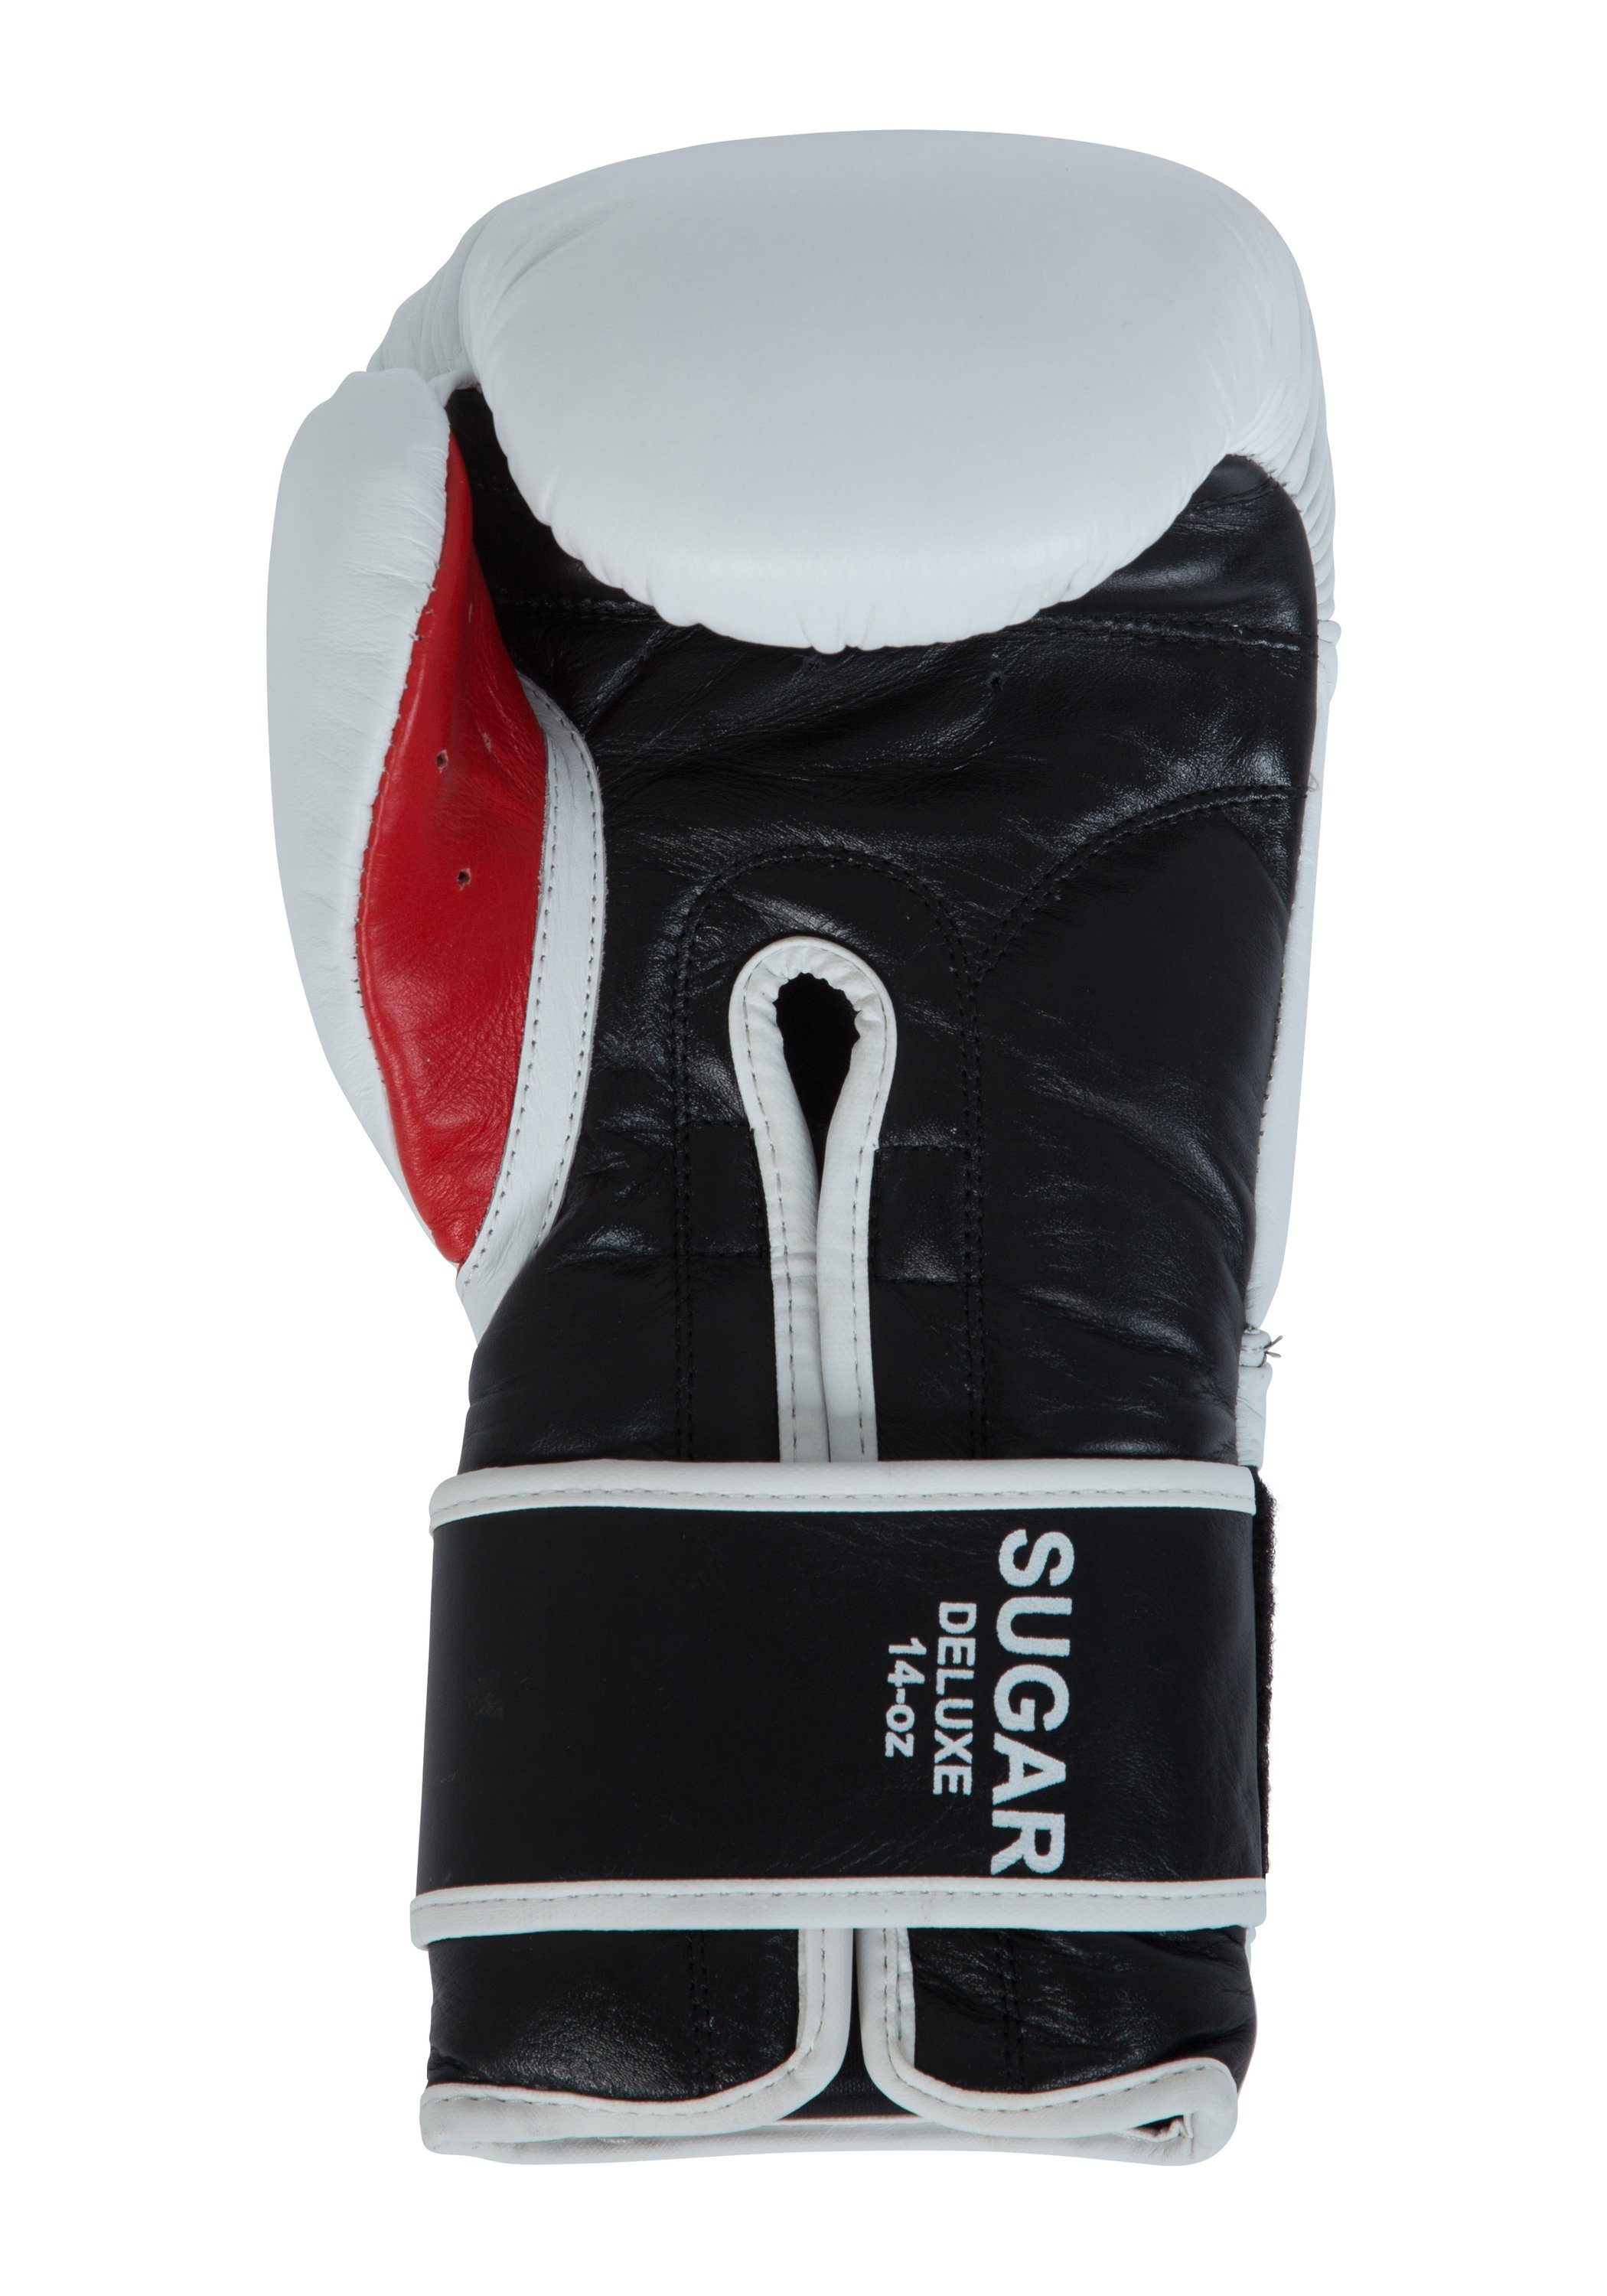 Boxhandschuhe Marciano White DELUXE Rocky SUGAR Benlee